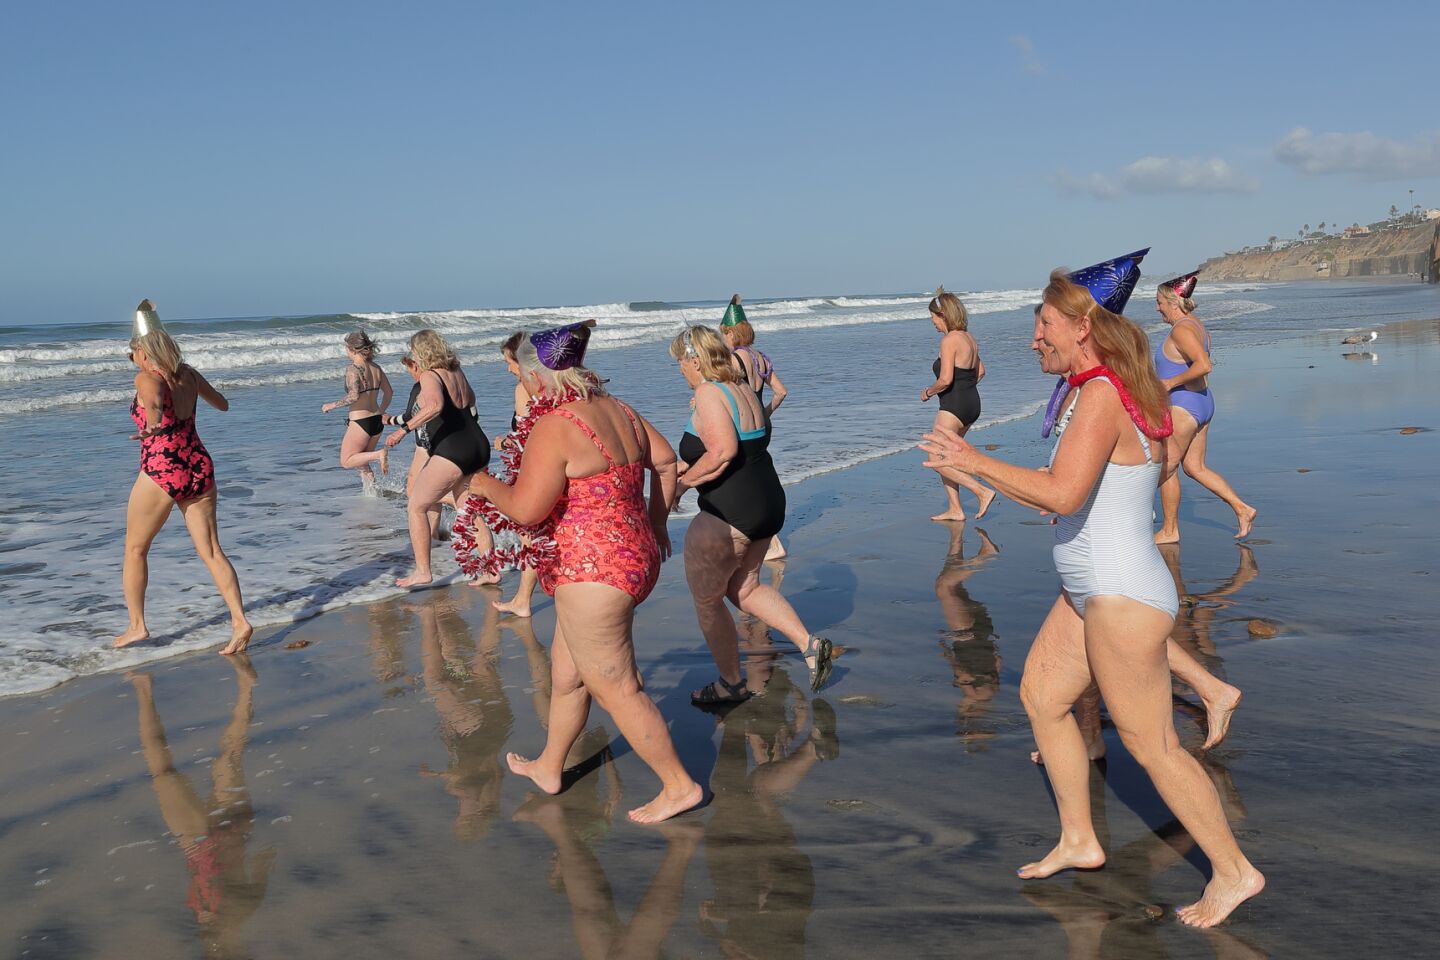 Members of the San Dieguito Boogie Babes plunged into the ocean on New Years Day 2022 at Fletcher Cove in Solana Beach